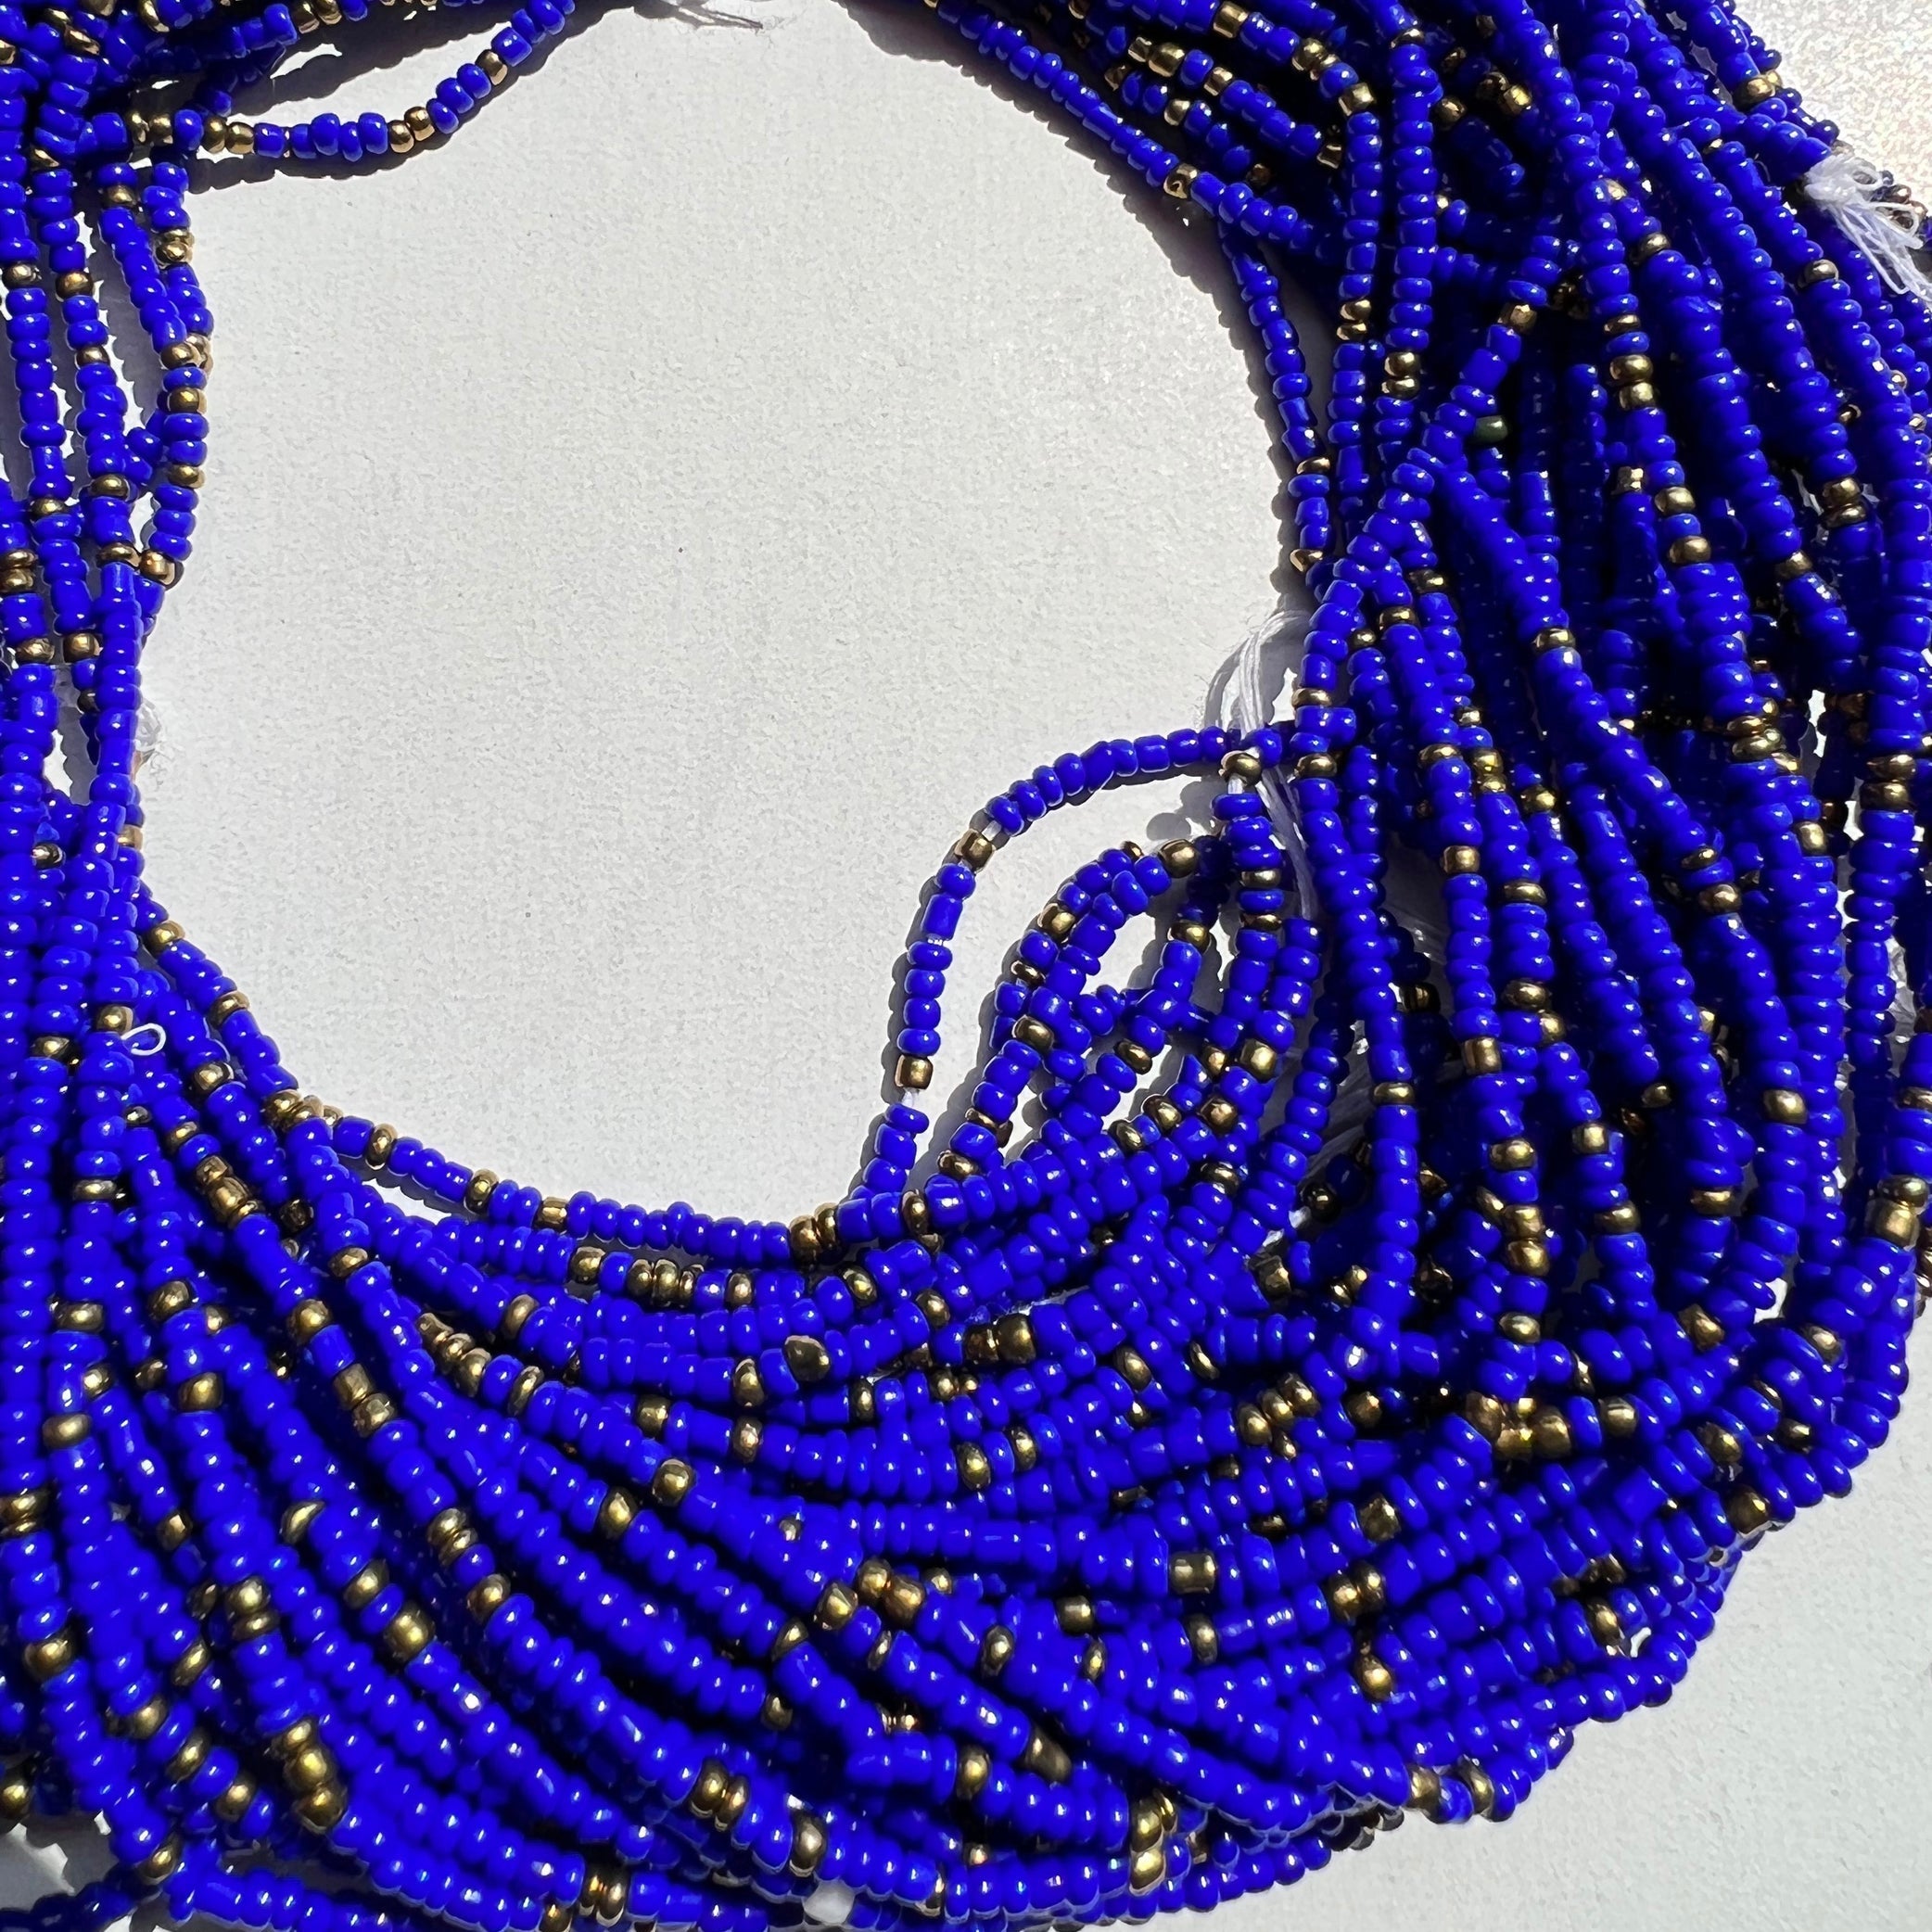 Blue and Gold waist beads for weight loss